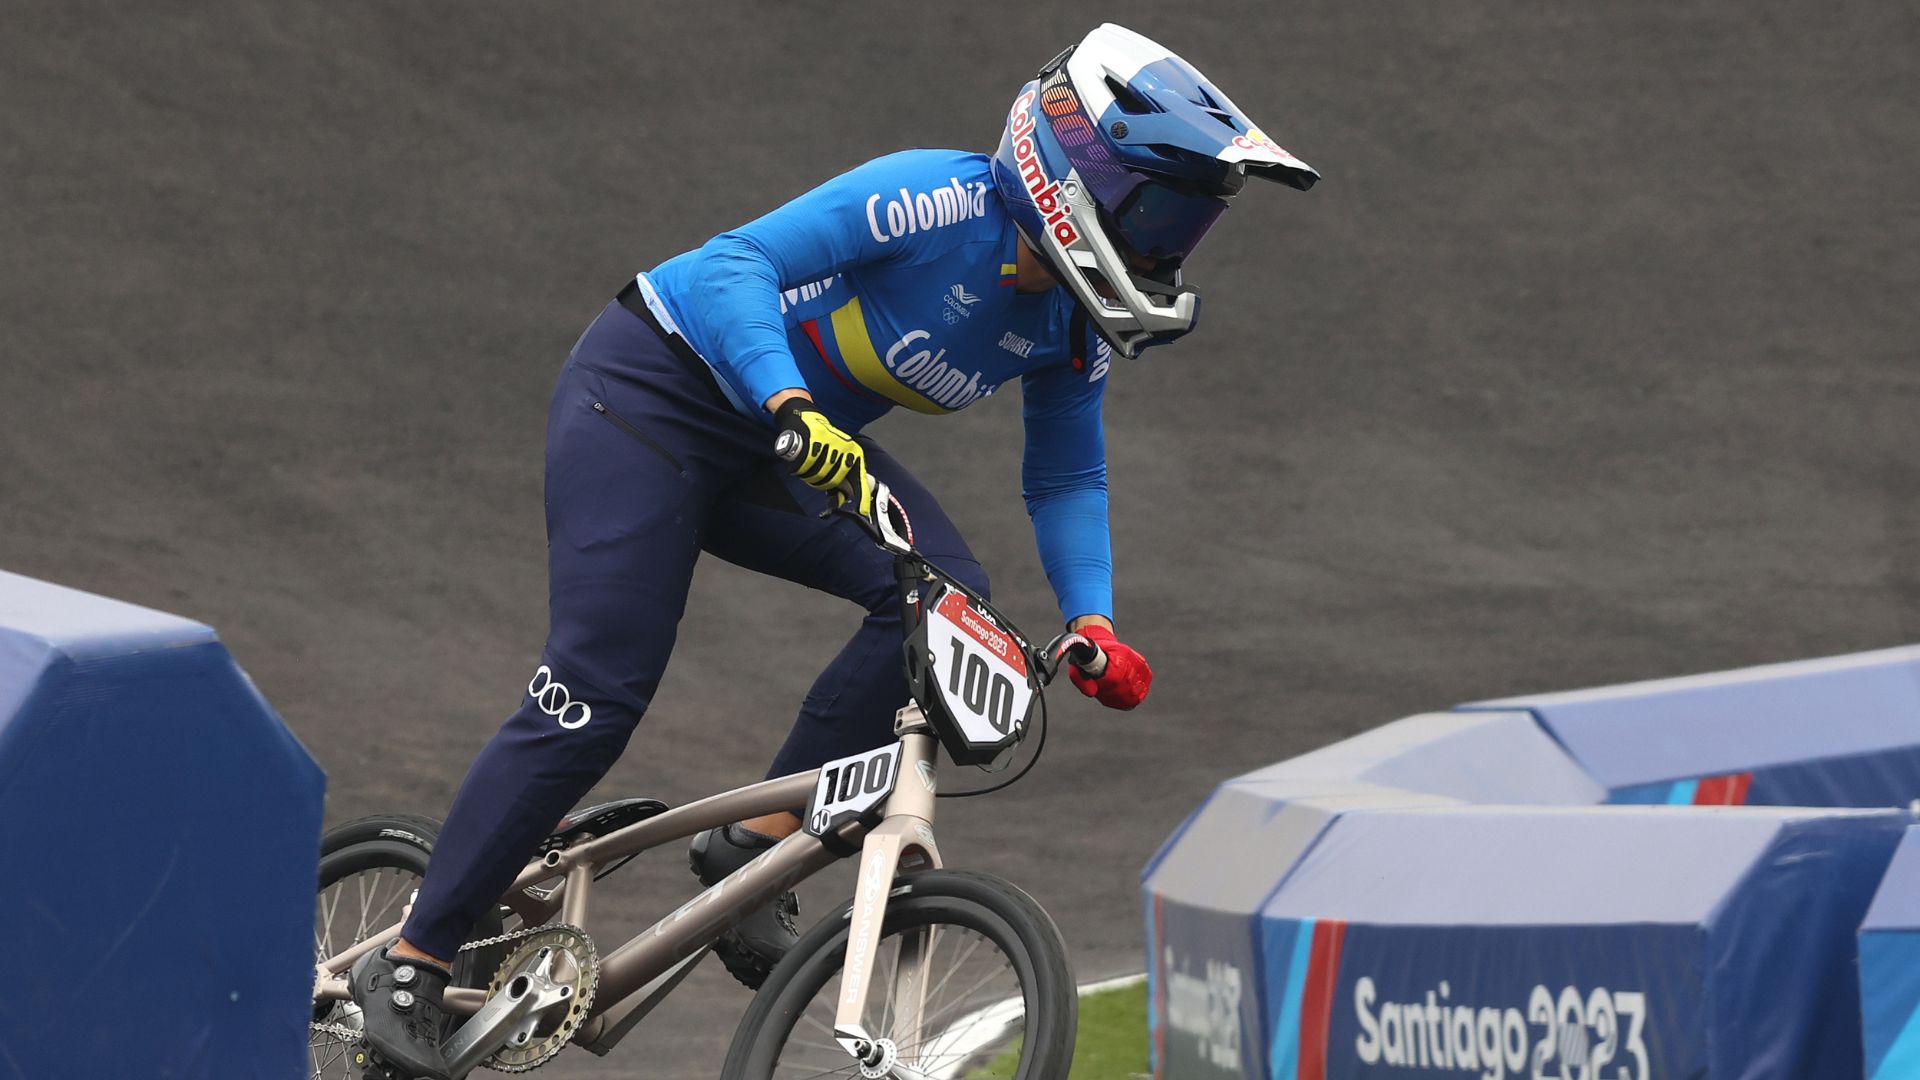 Colombian Mariana Pajón Londoño won the gold in BMX Cycling at Santiago 2023